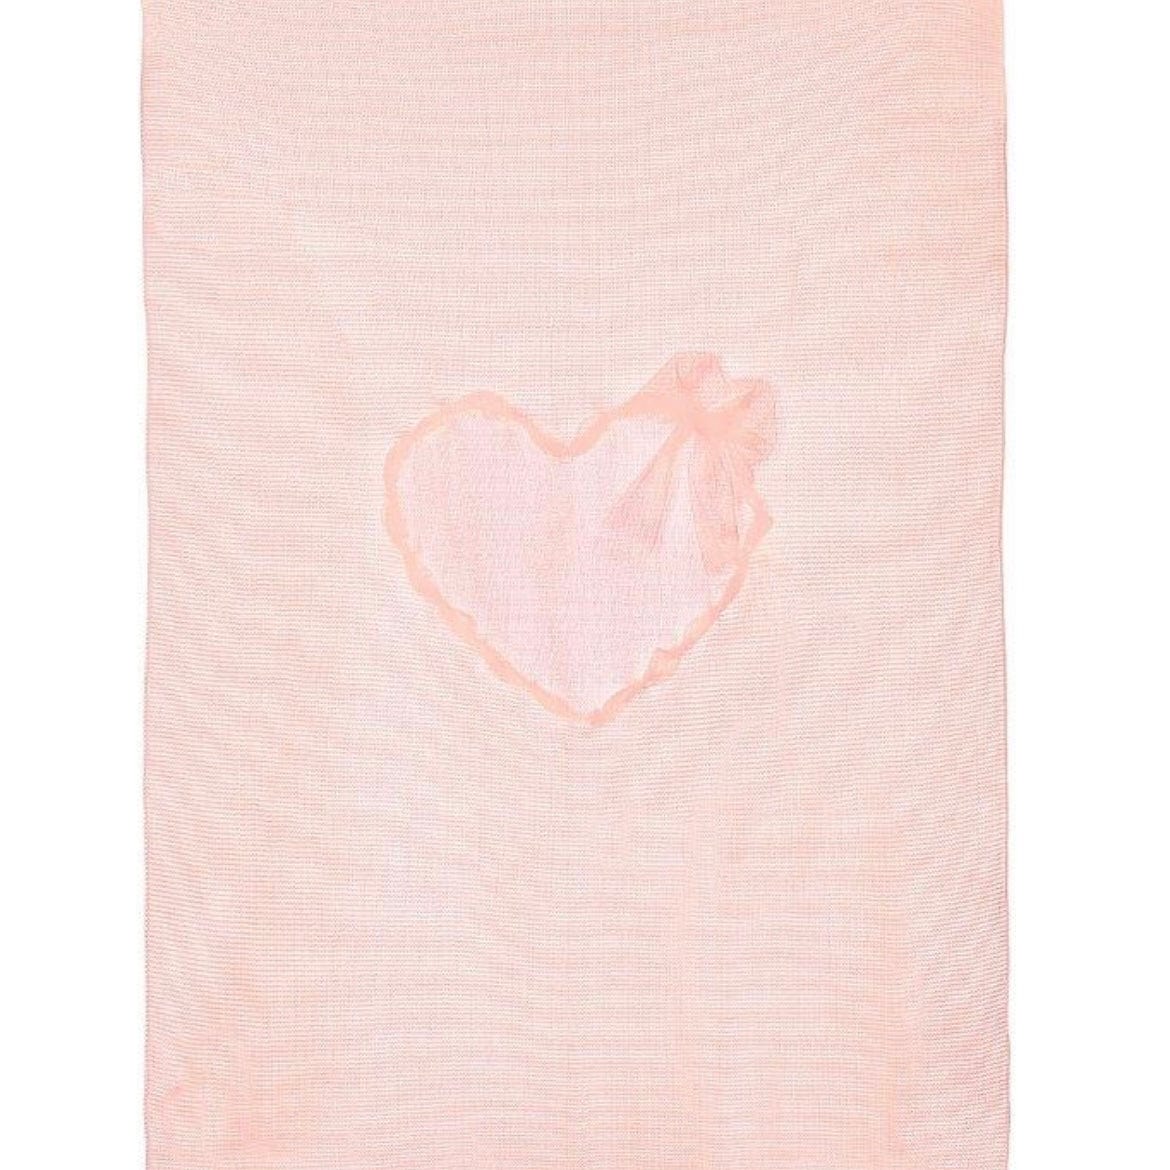 BIMBALO - Knitted  Blanket - Pink